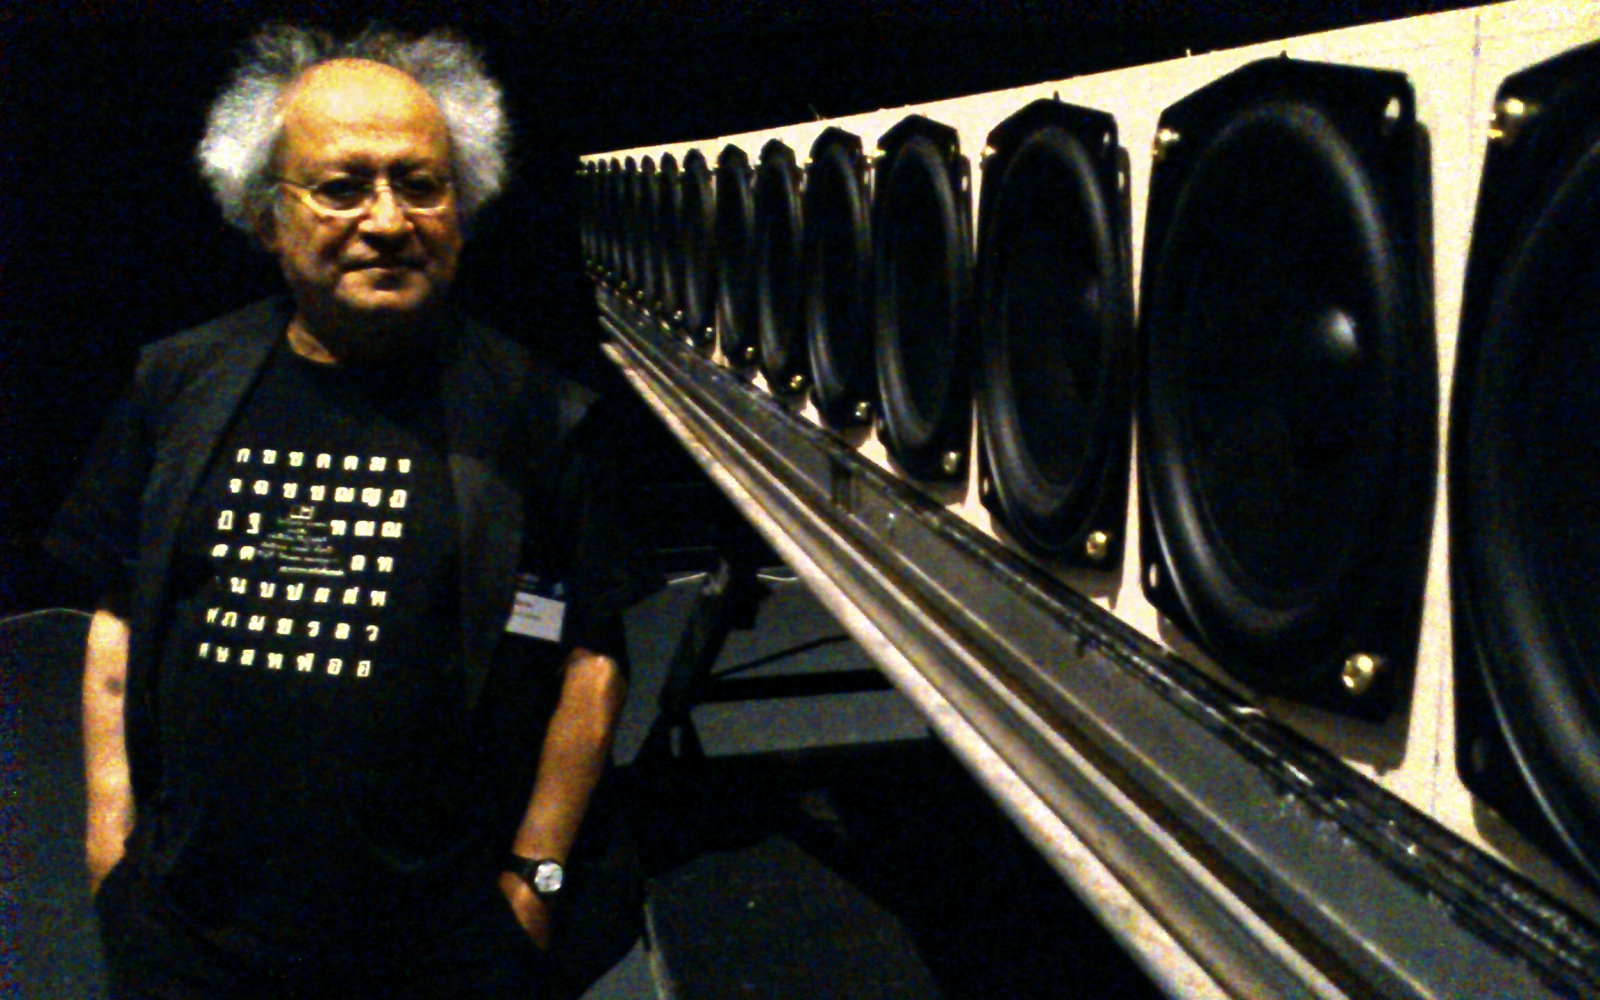 A man stands next to a set of speakers